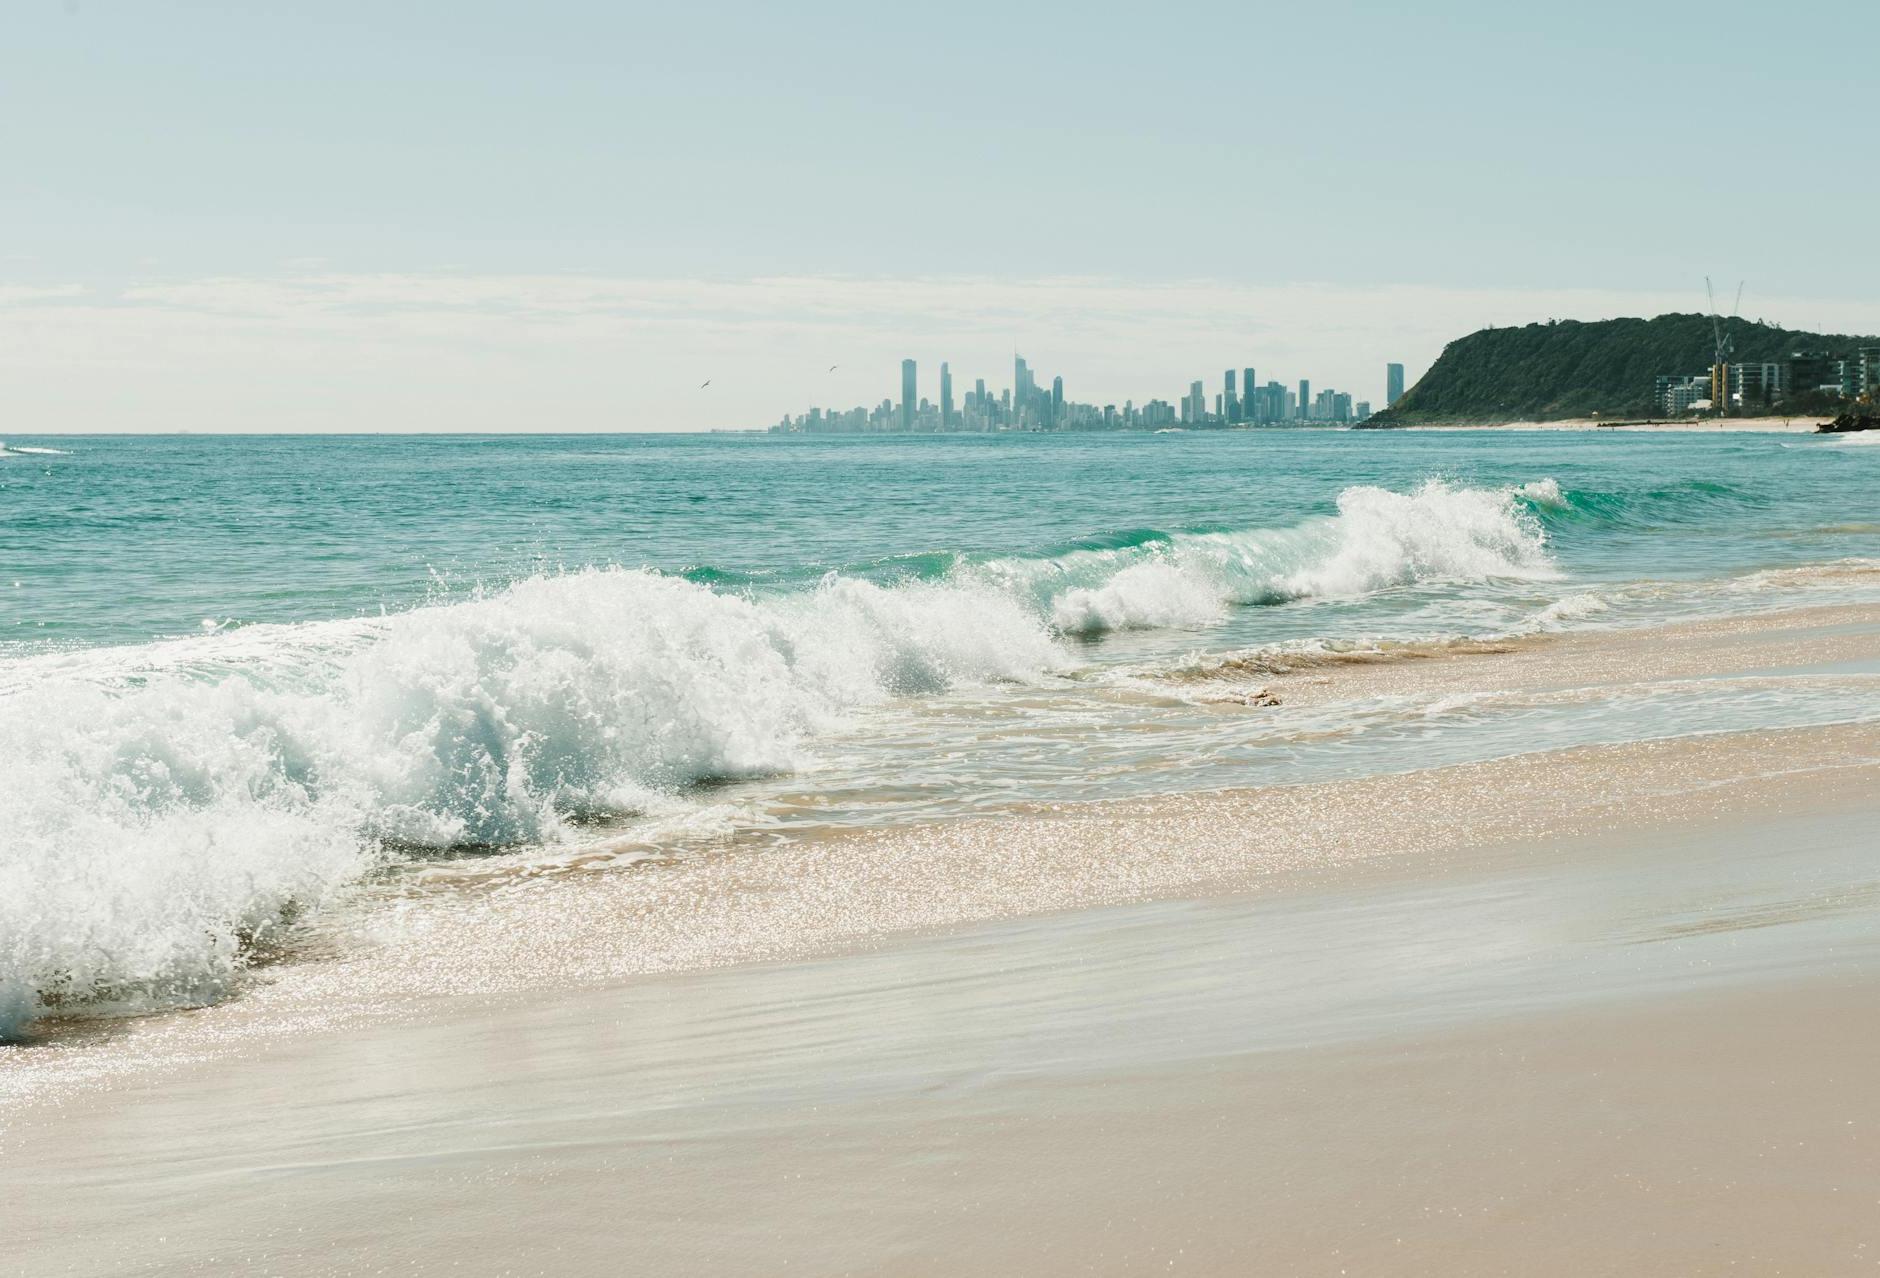 Waves Rolling on a Beach with City Skyline Seen on the Horizon, Gold Coast, Queensland, Australia